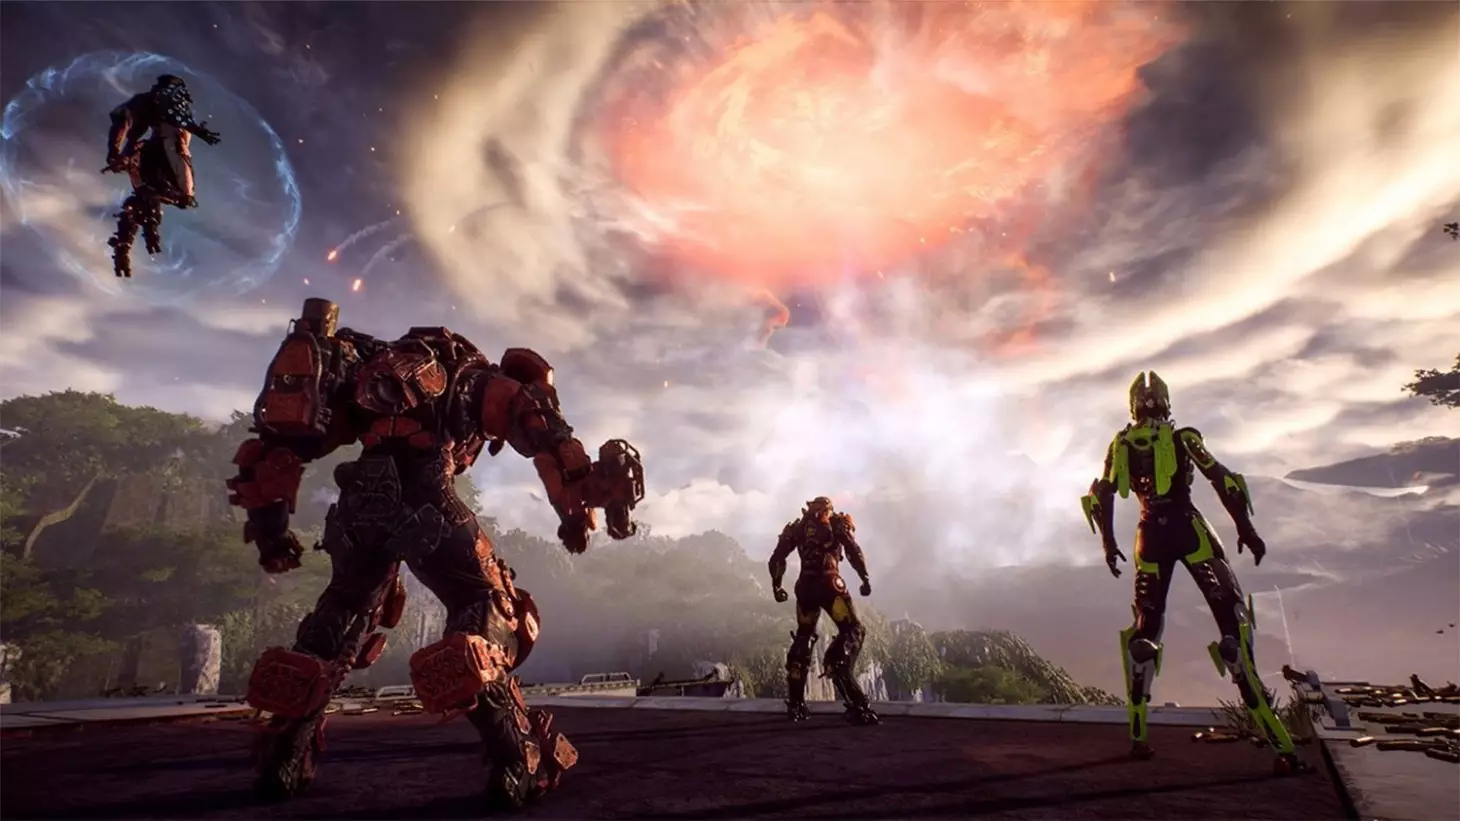 BioWare crunched on Anthem - but that couldn't prevent the game being a flop /